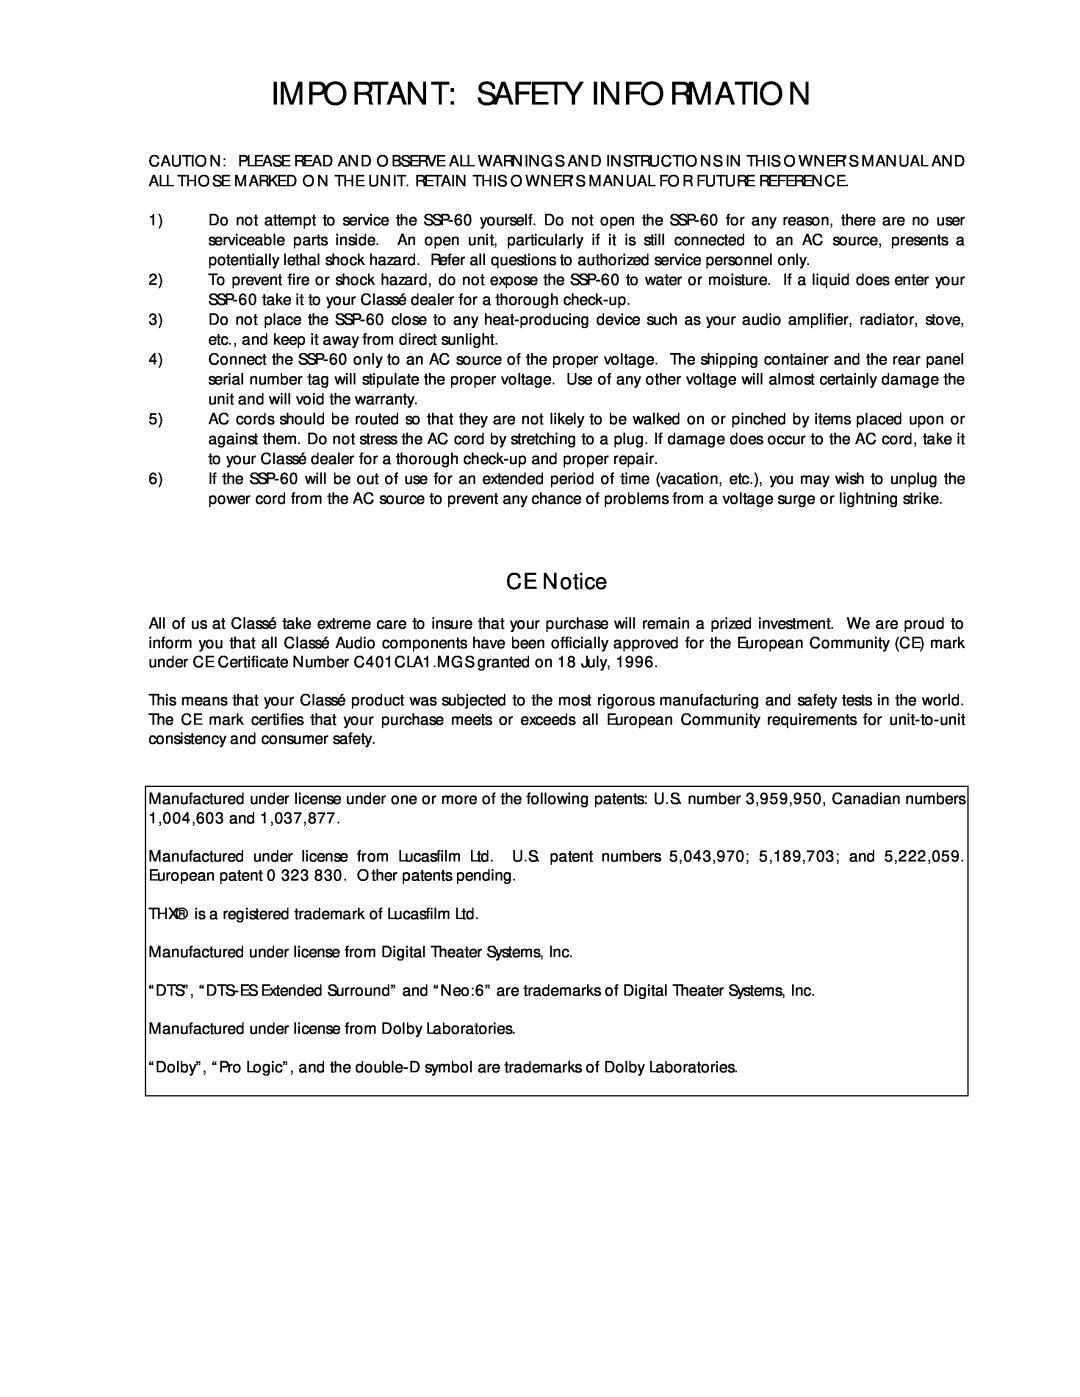 Classe Audio SSP-60 owner manual Important Safety Information, CE Notice 